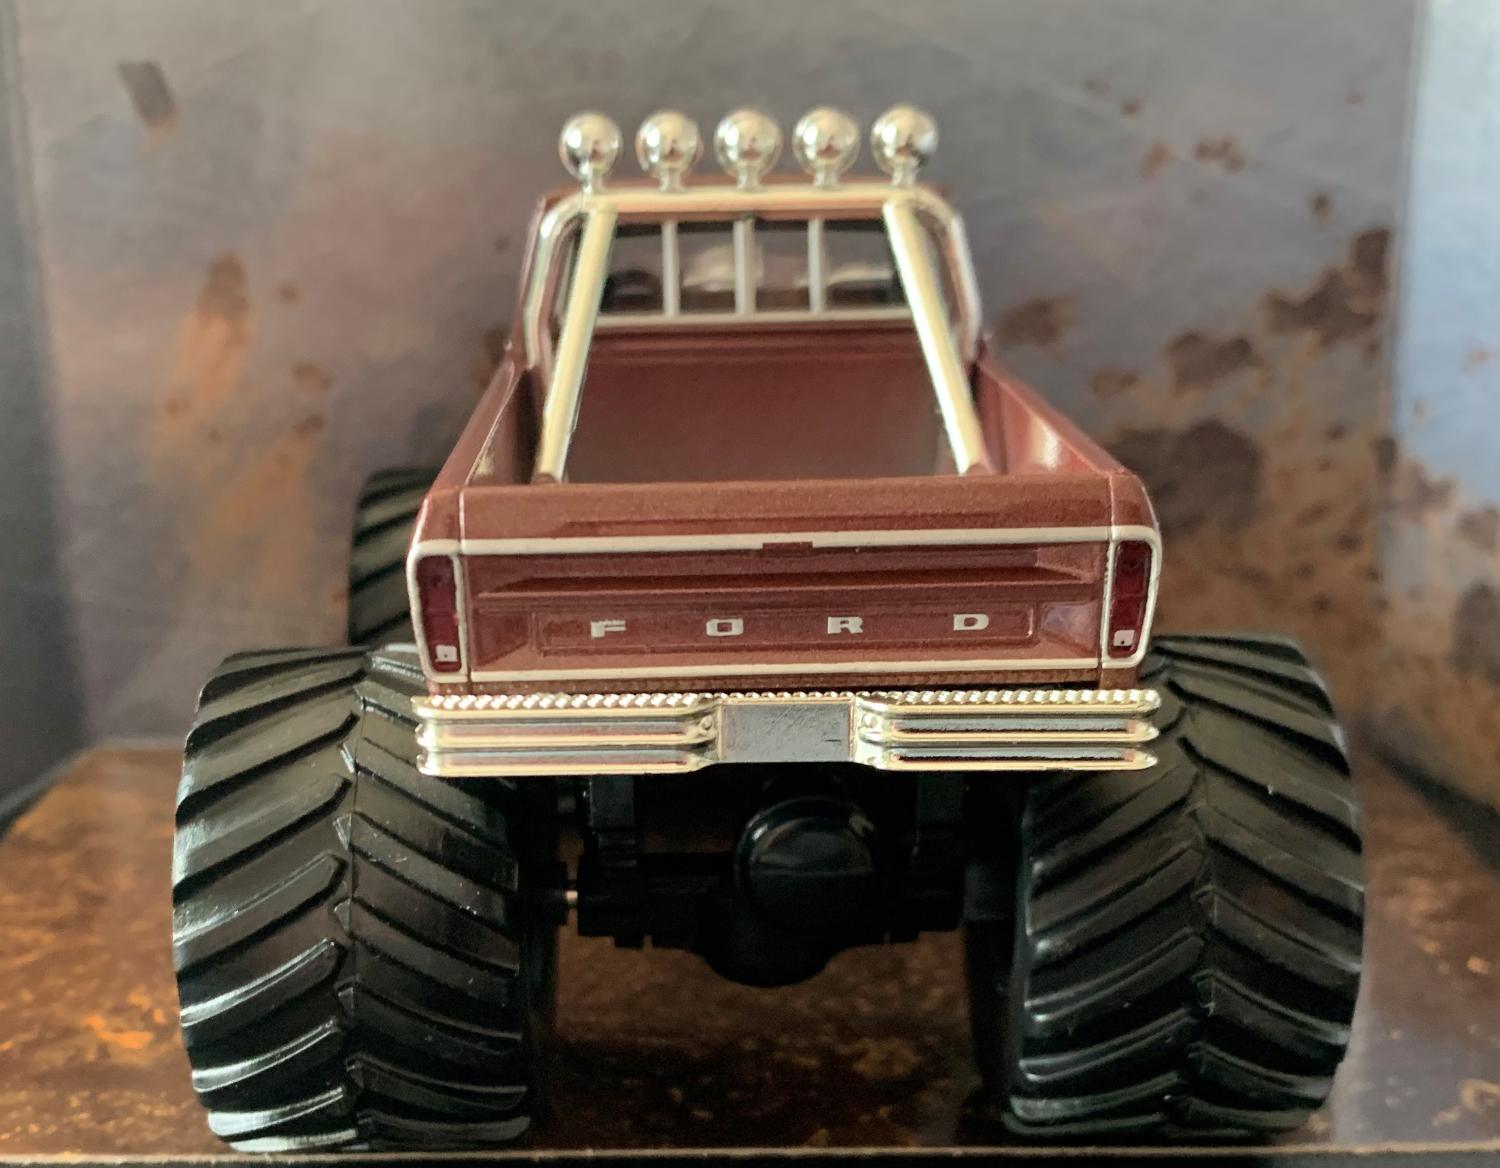 Ford F-250 Goliath 1979 in brown 1:43 scale model from Greenlight, limited edition model